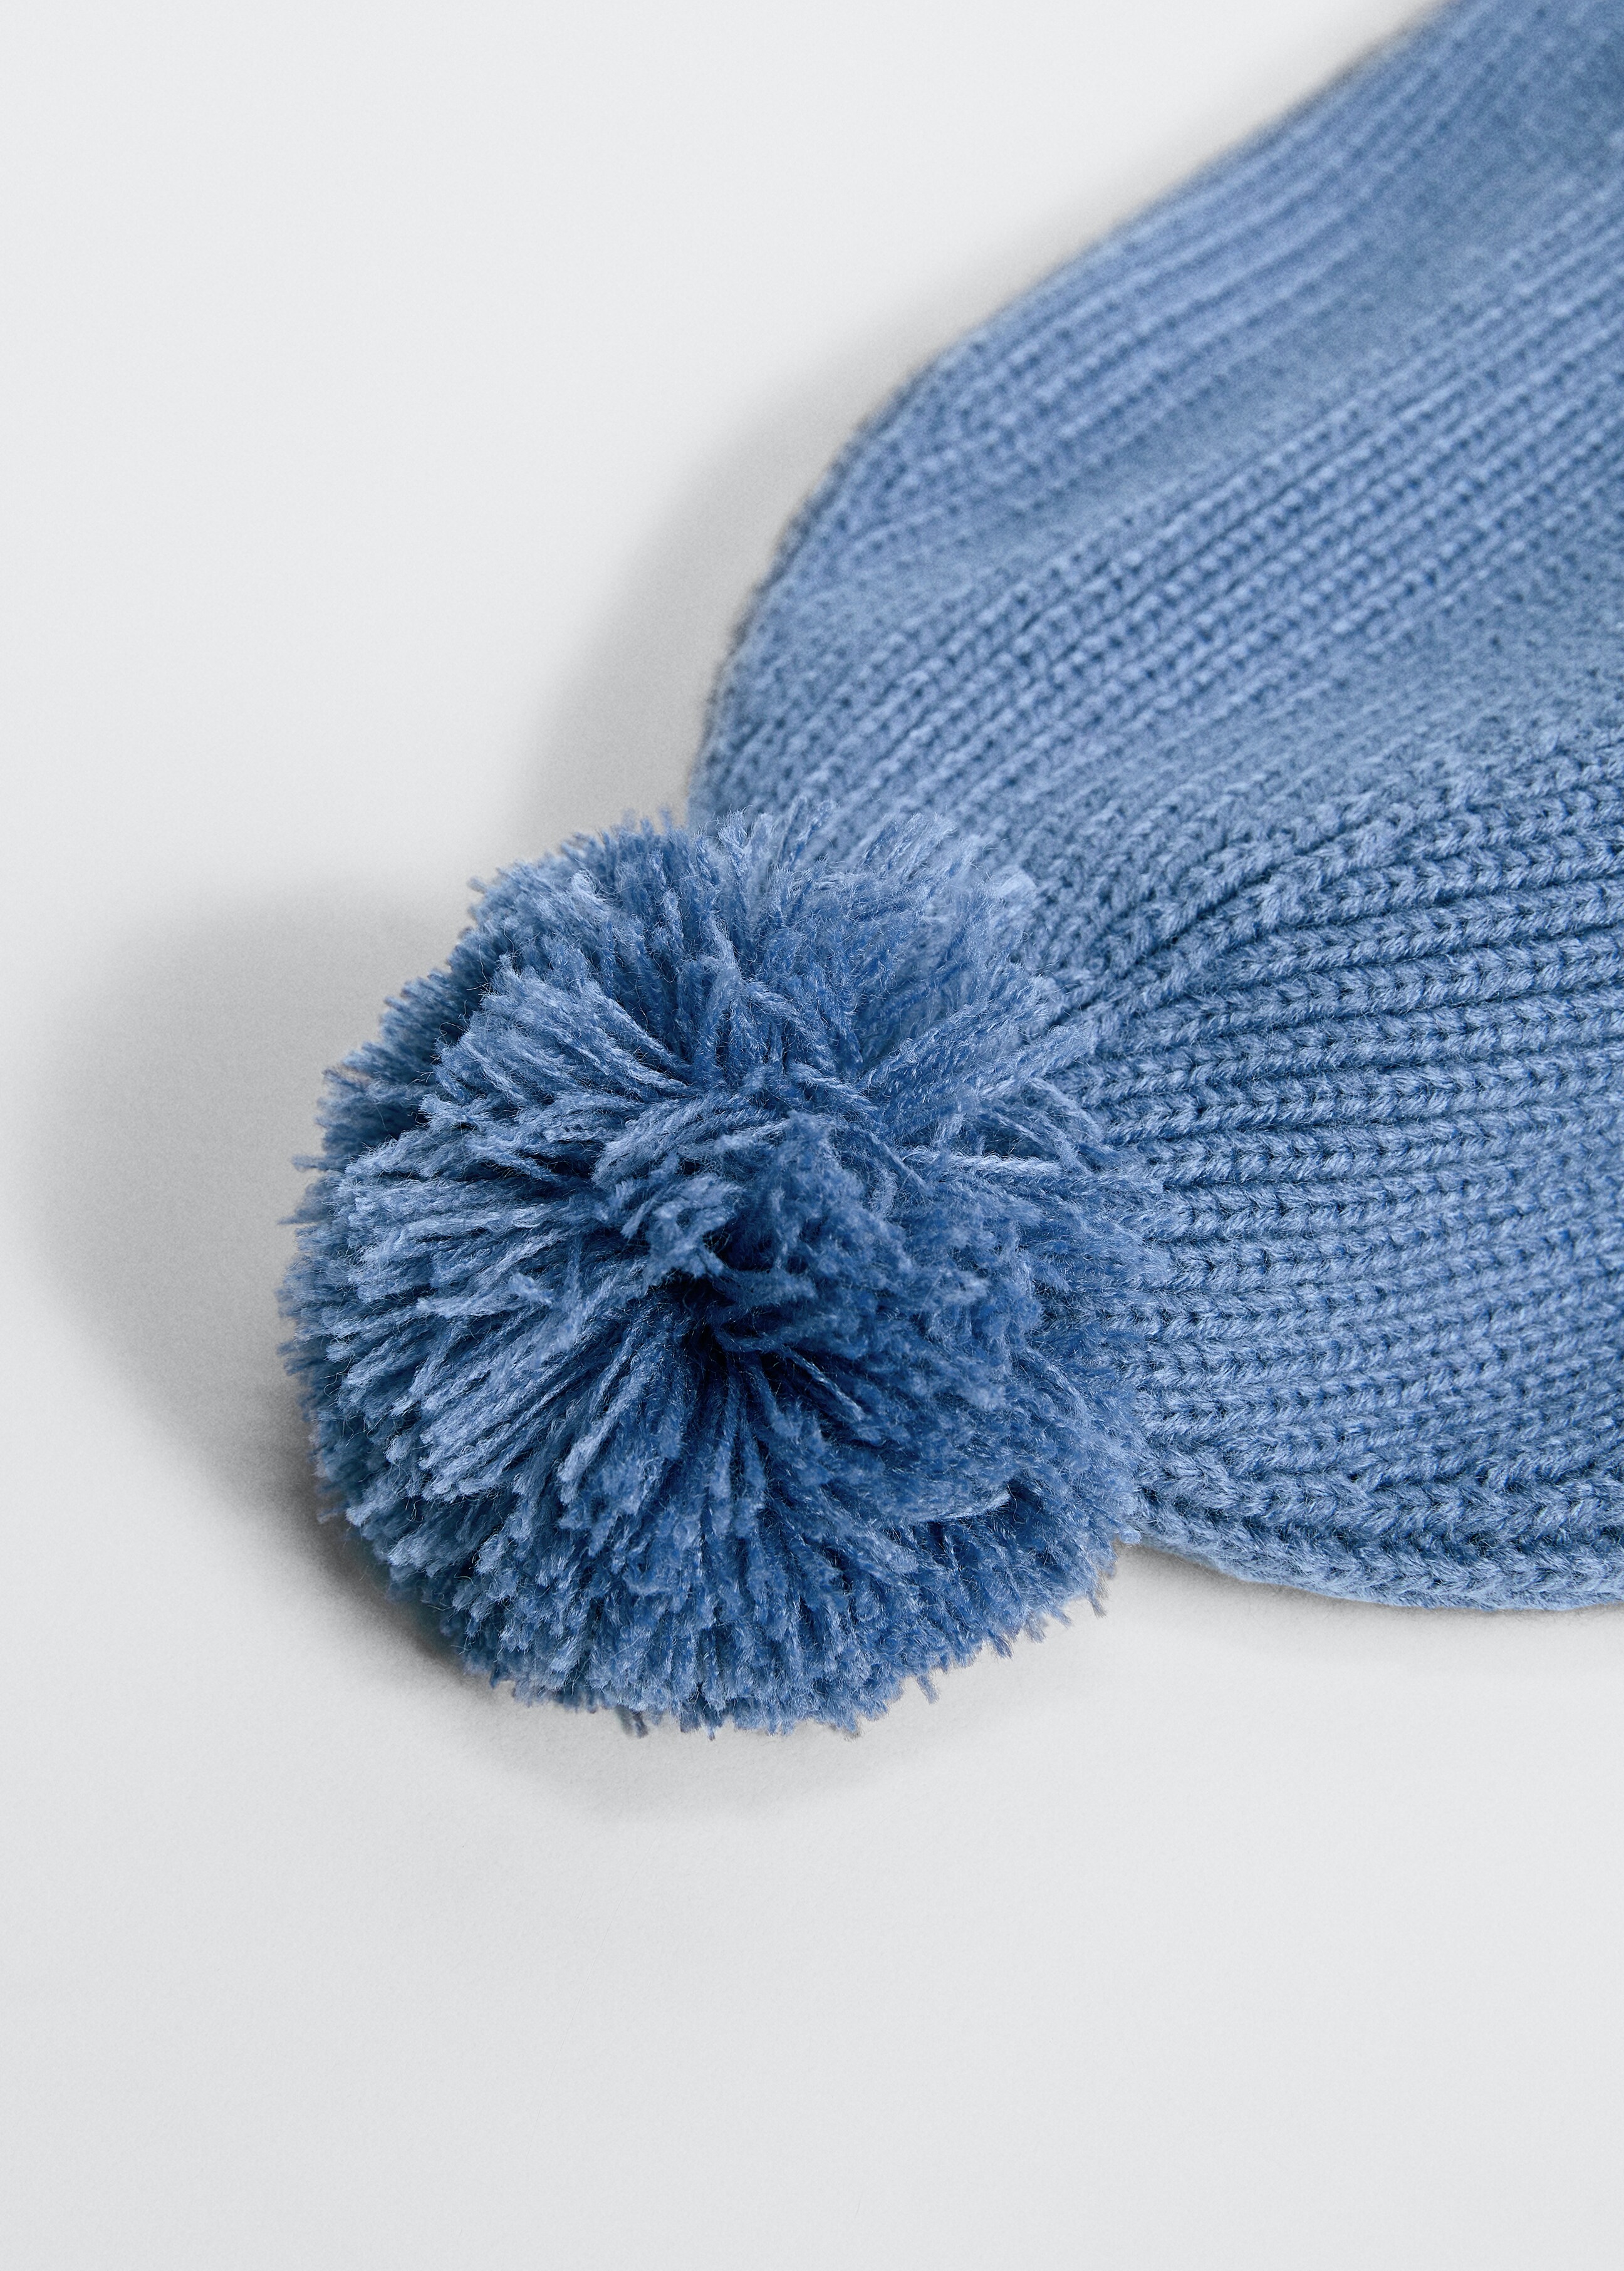 Earmuff knitted hat - Details of the article 1